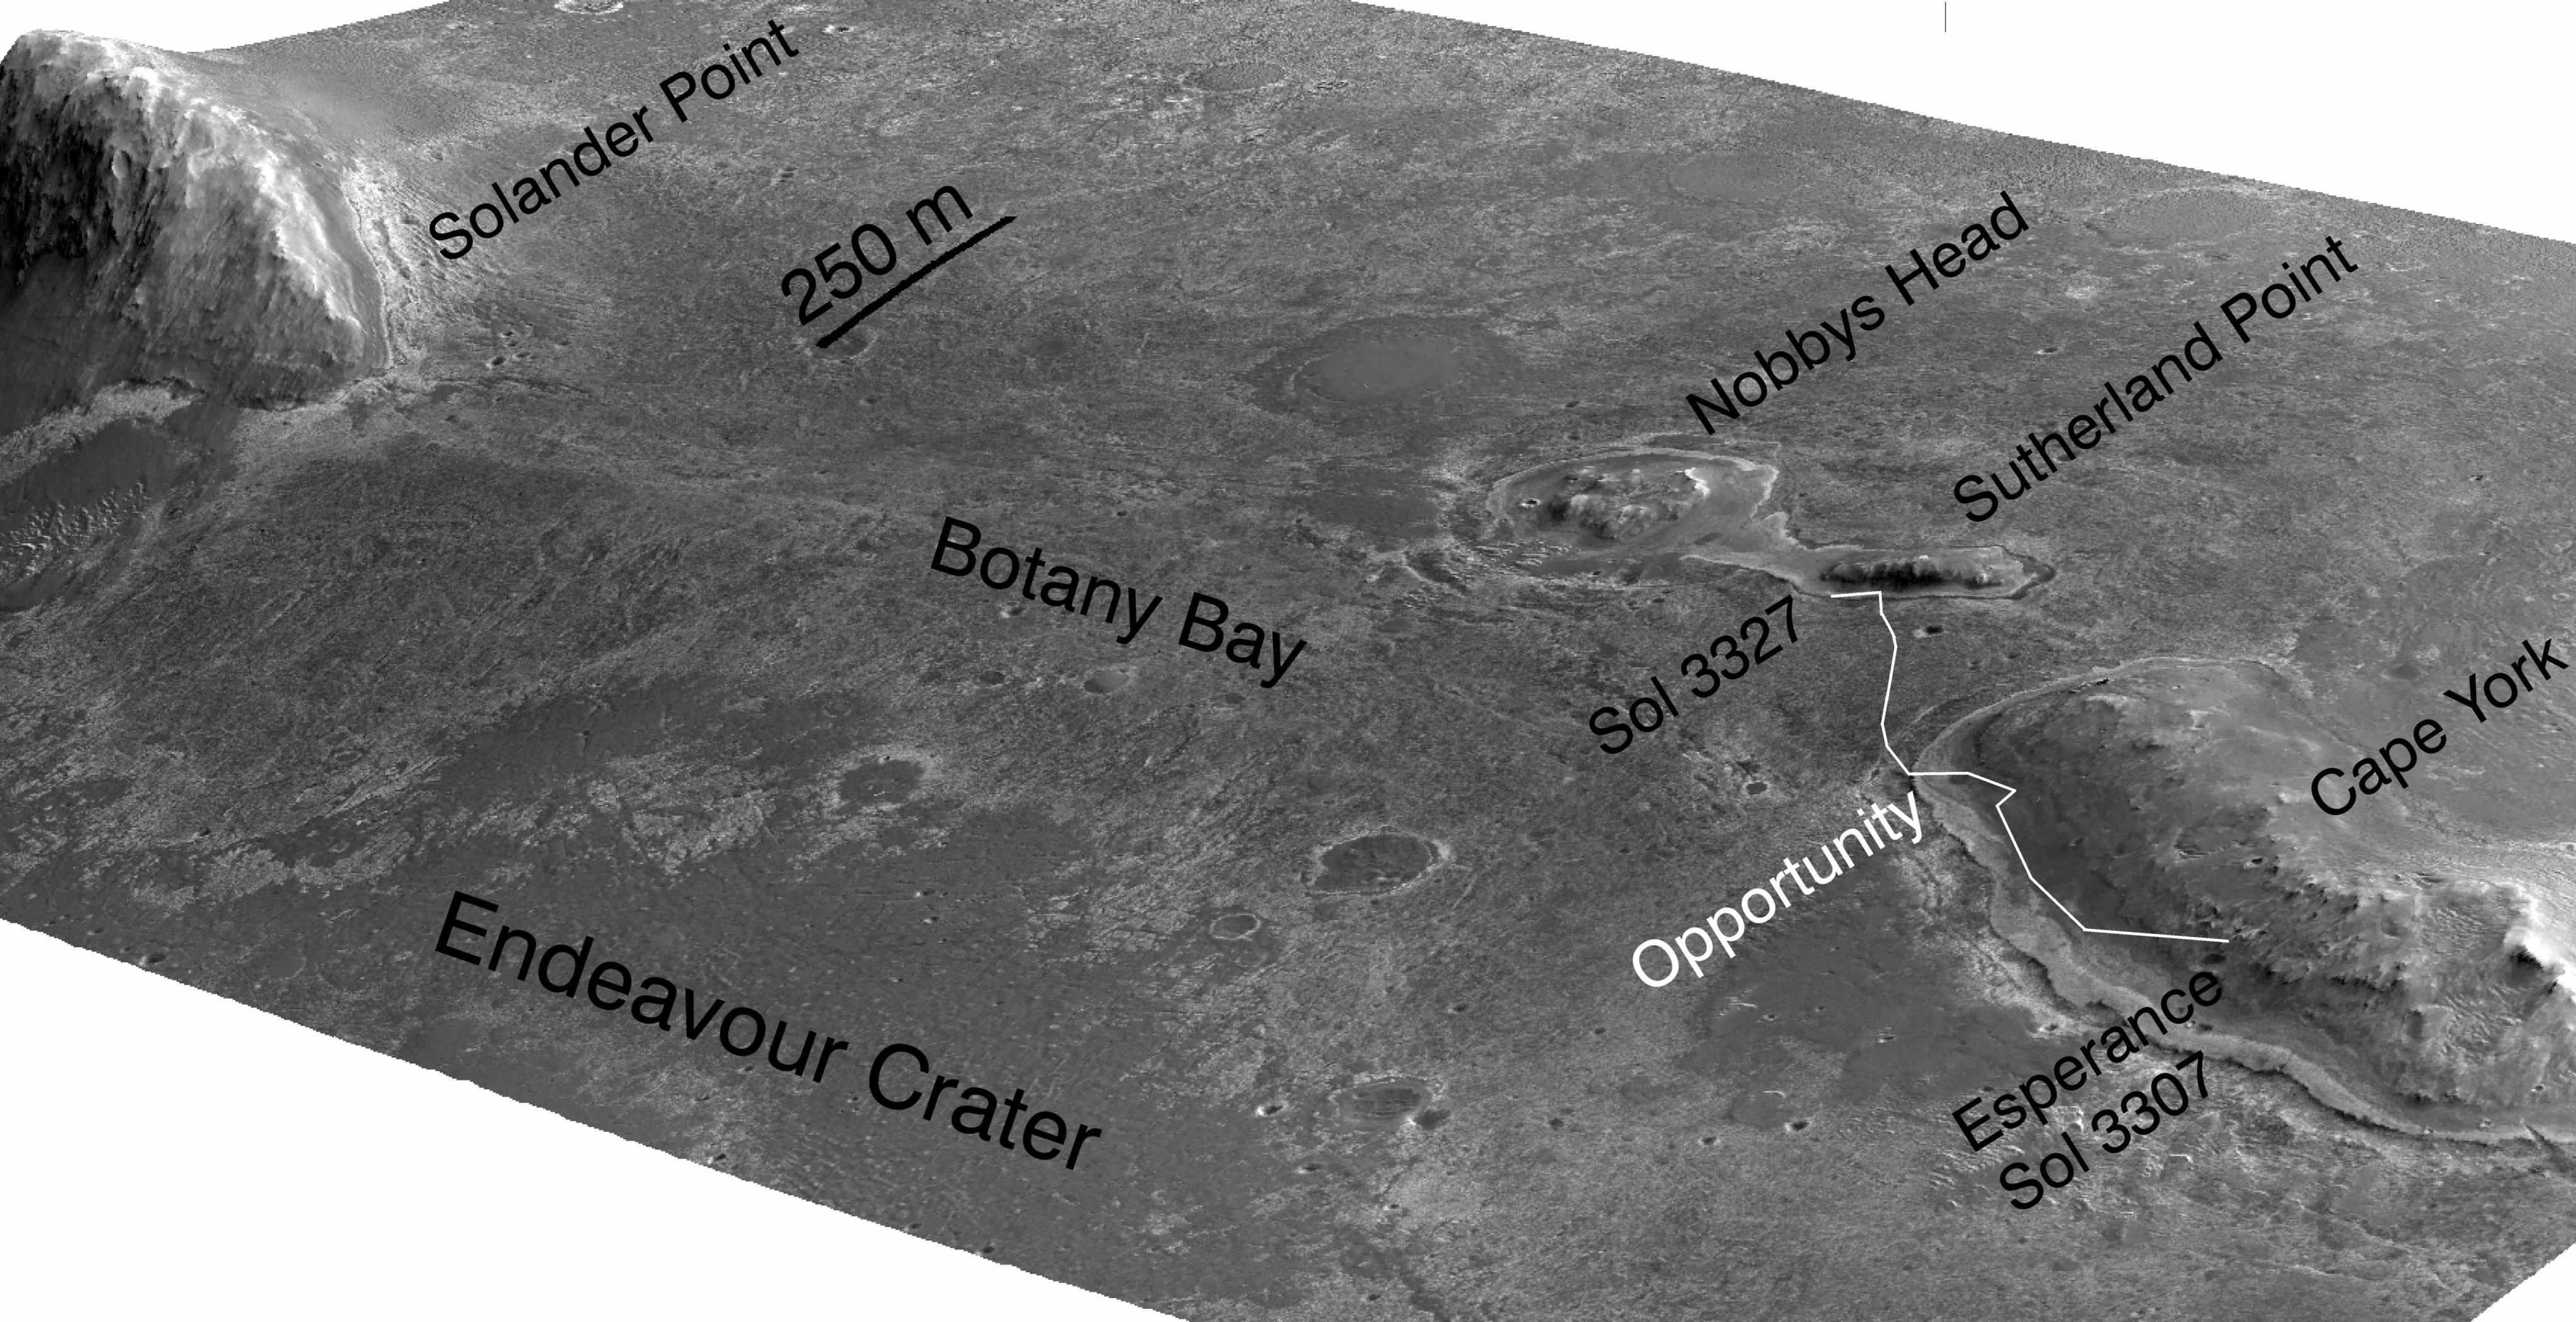 A stereo pair of images from taken from Mars orbit were used to generate a digital elevation model that is the basis for this simulated perspective view of "Cape York," "Botany Bay," and "Solander Point" on the western rim of Endeavour Crater.